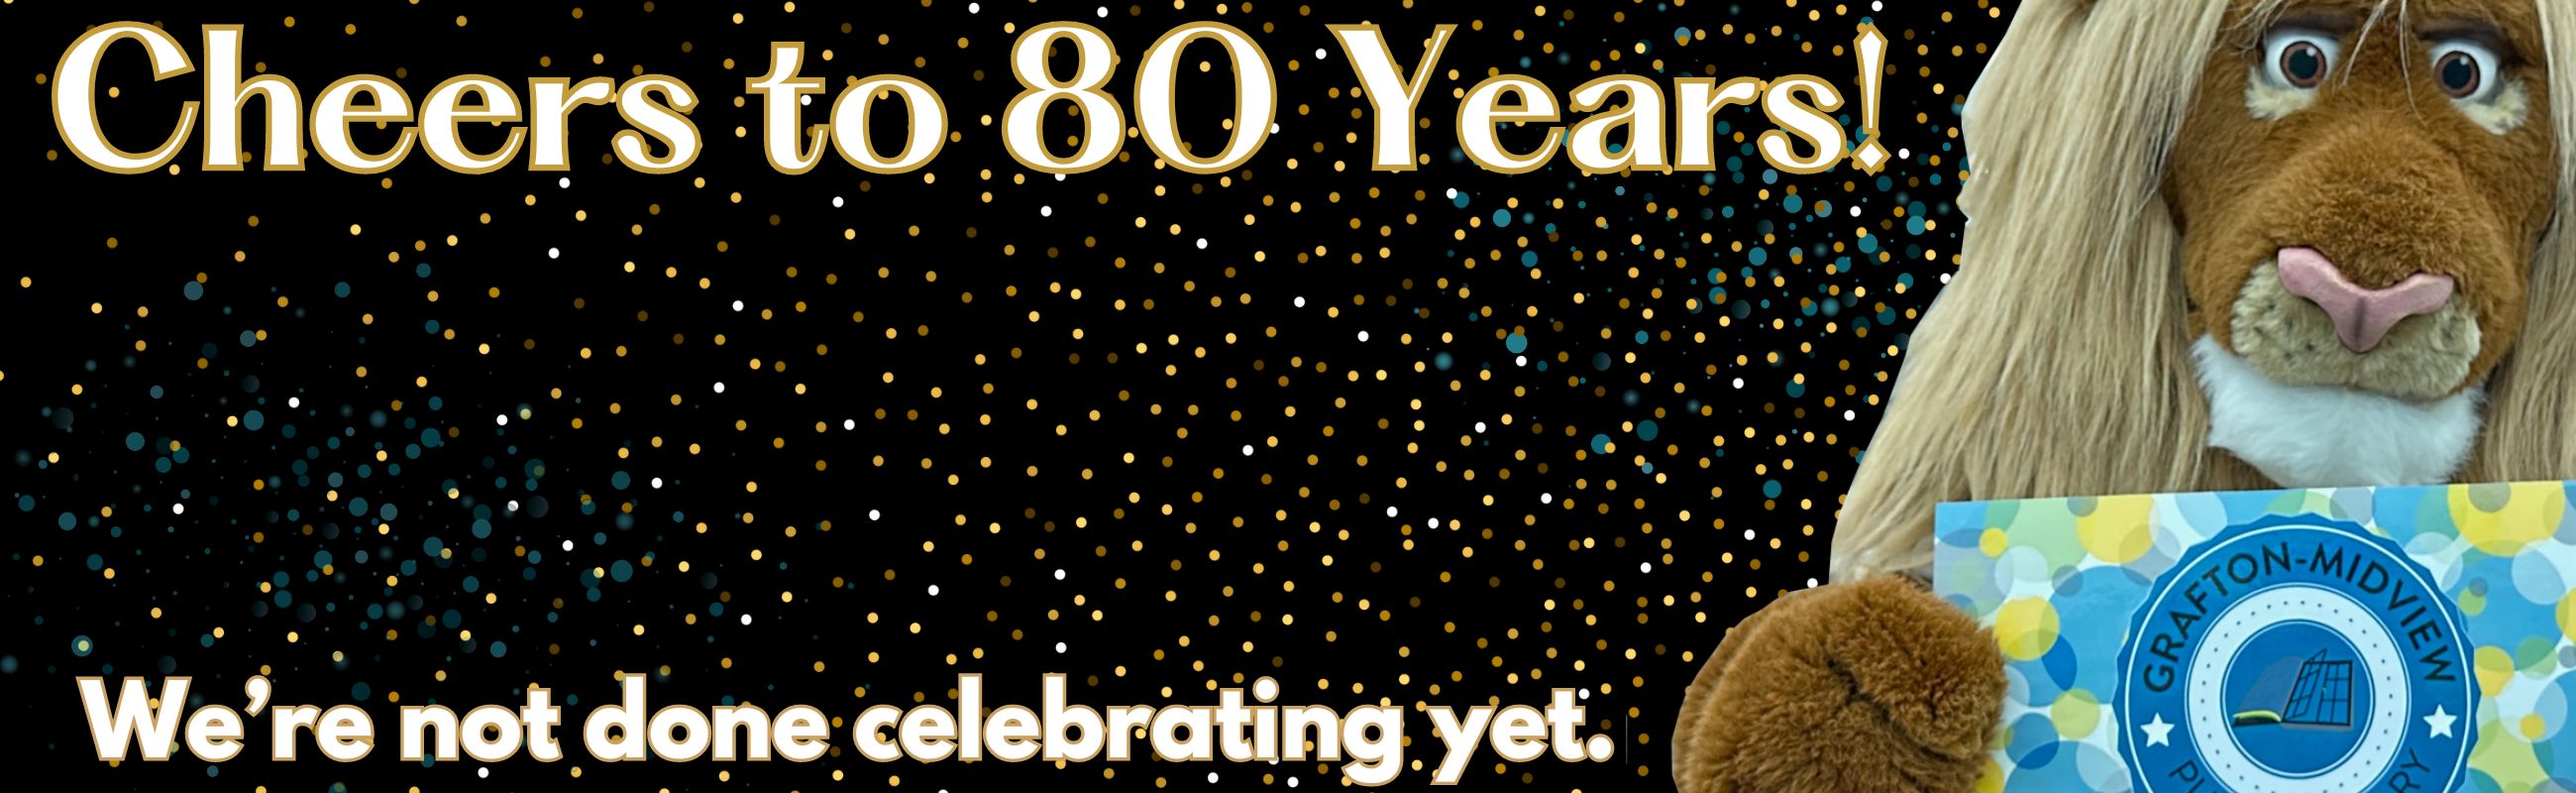 Learn more about our 80th anniversary.